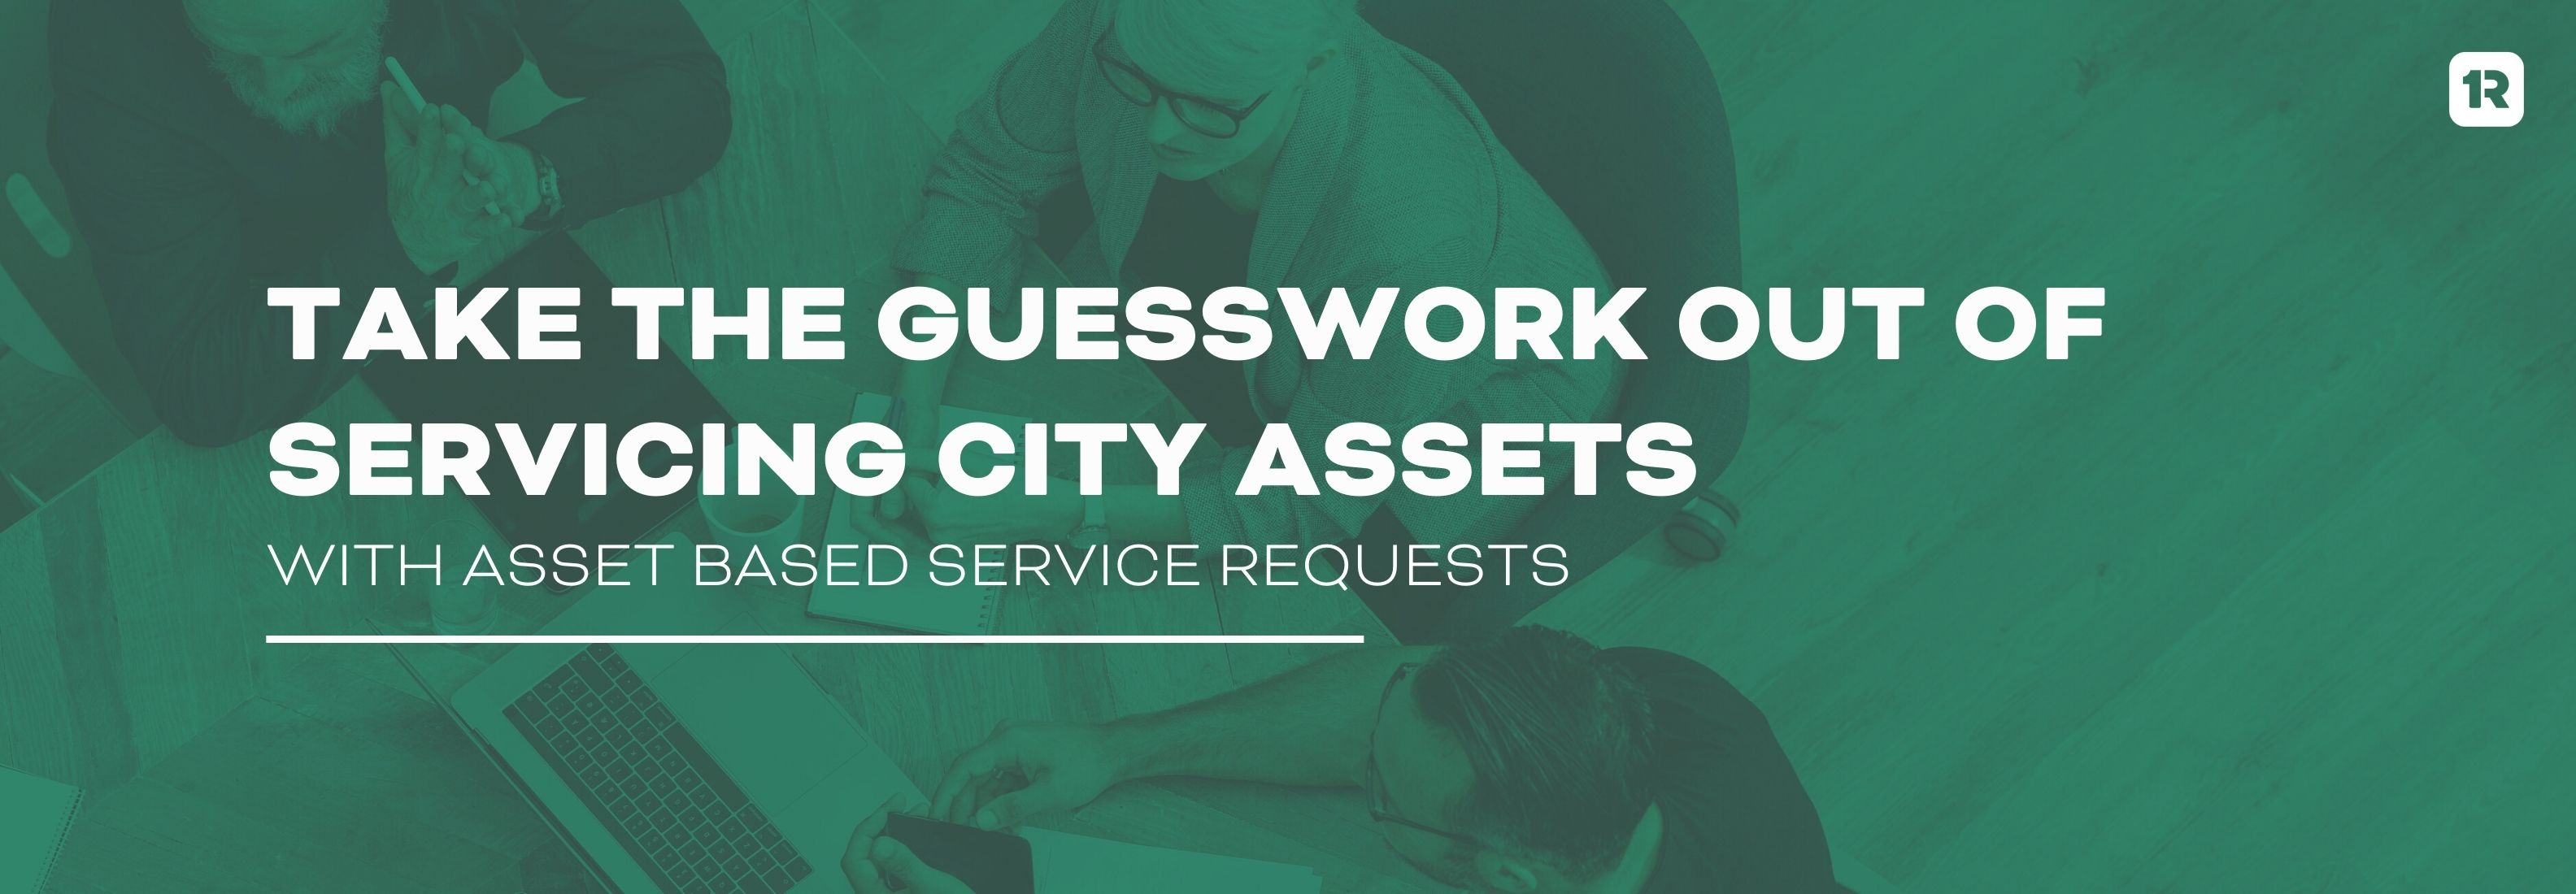 Take the Guesswork out of Servicing City Assets with Asset Based Service Requests